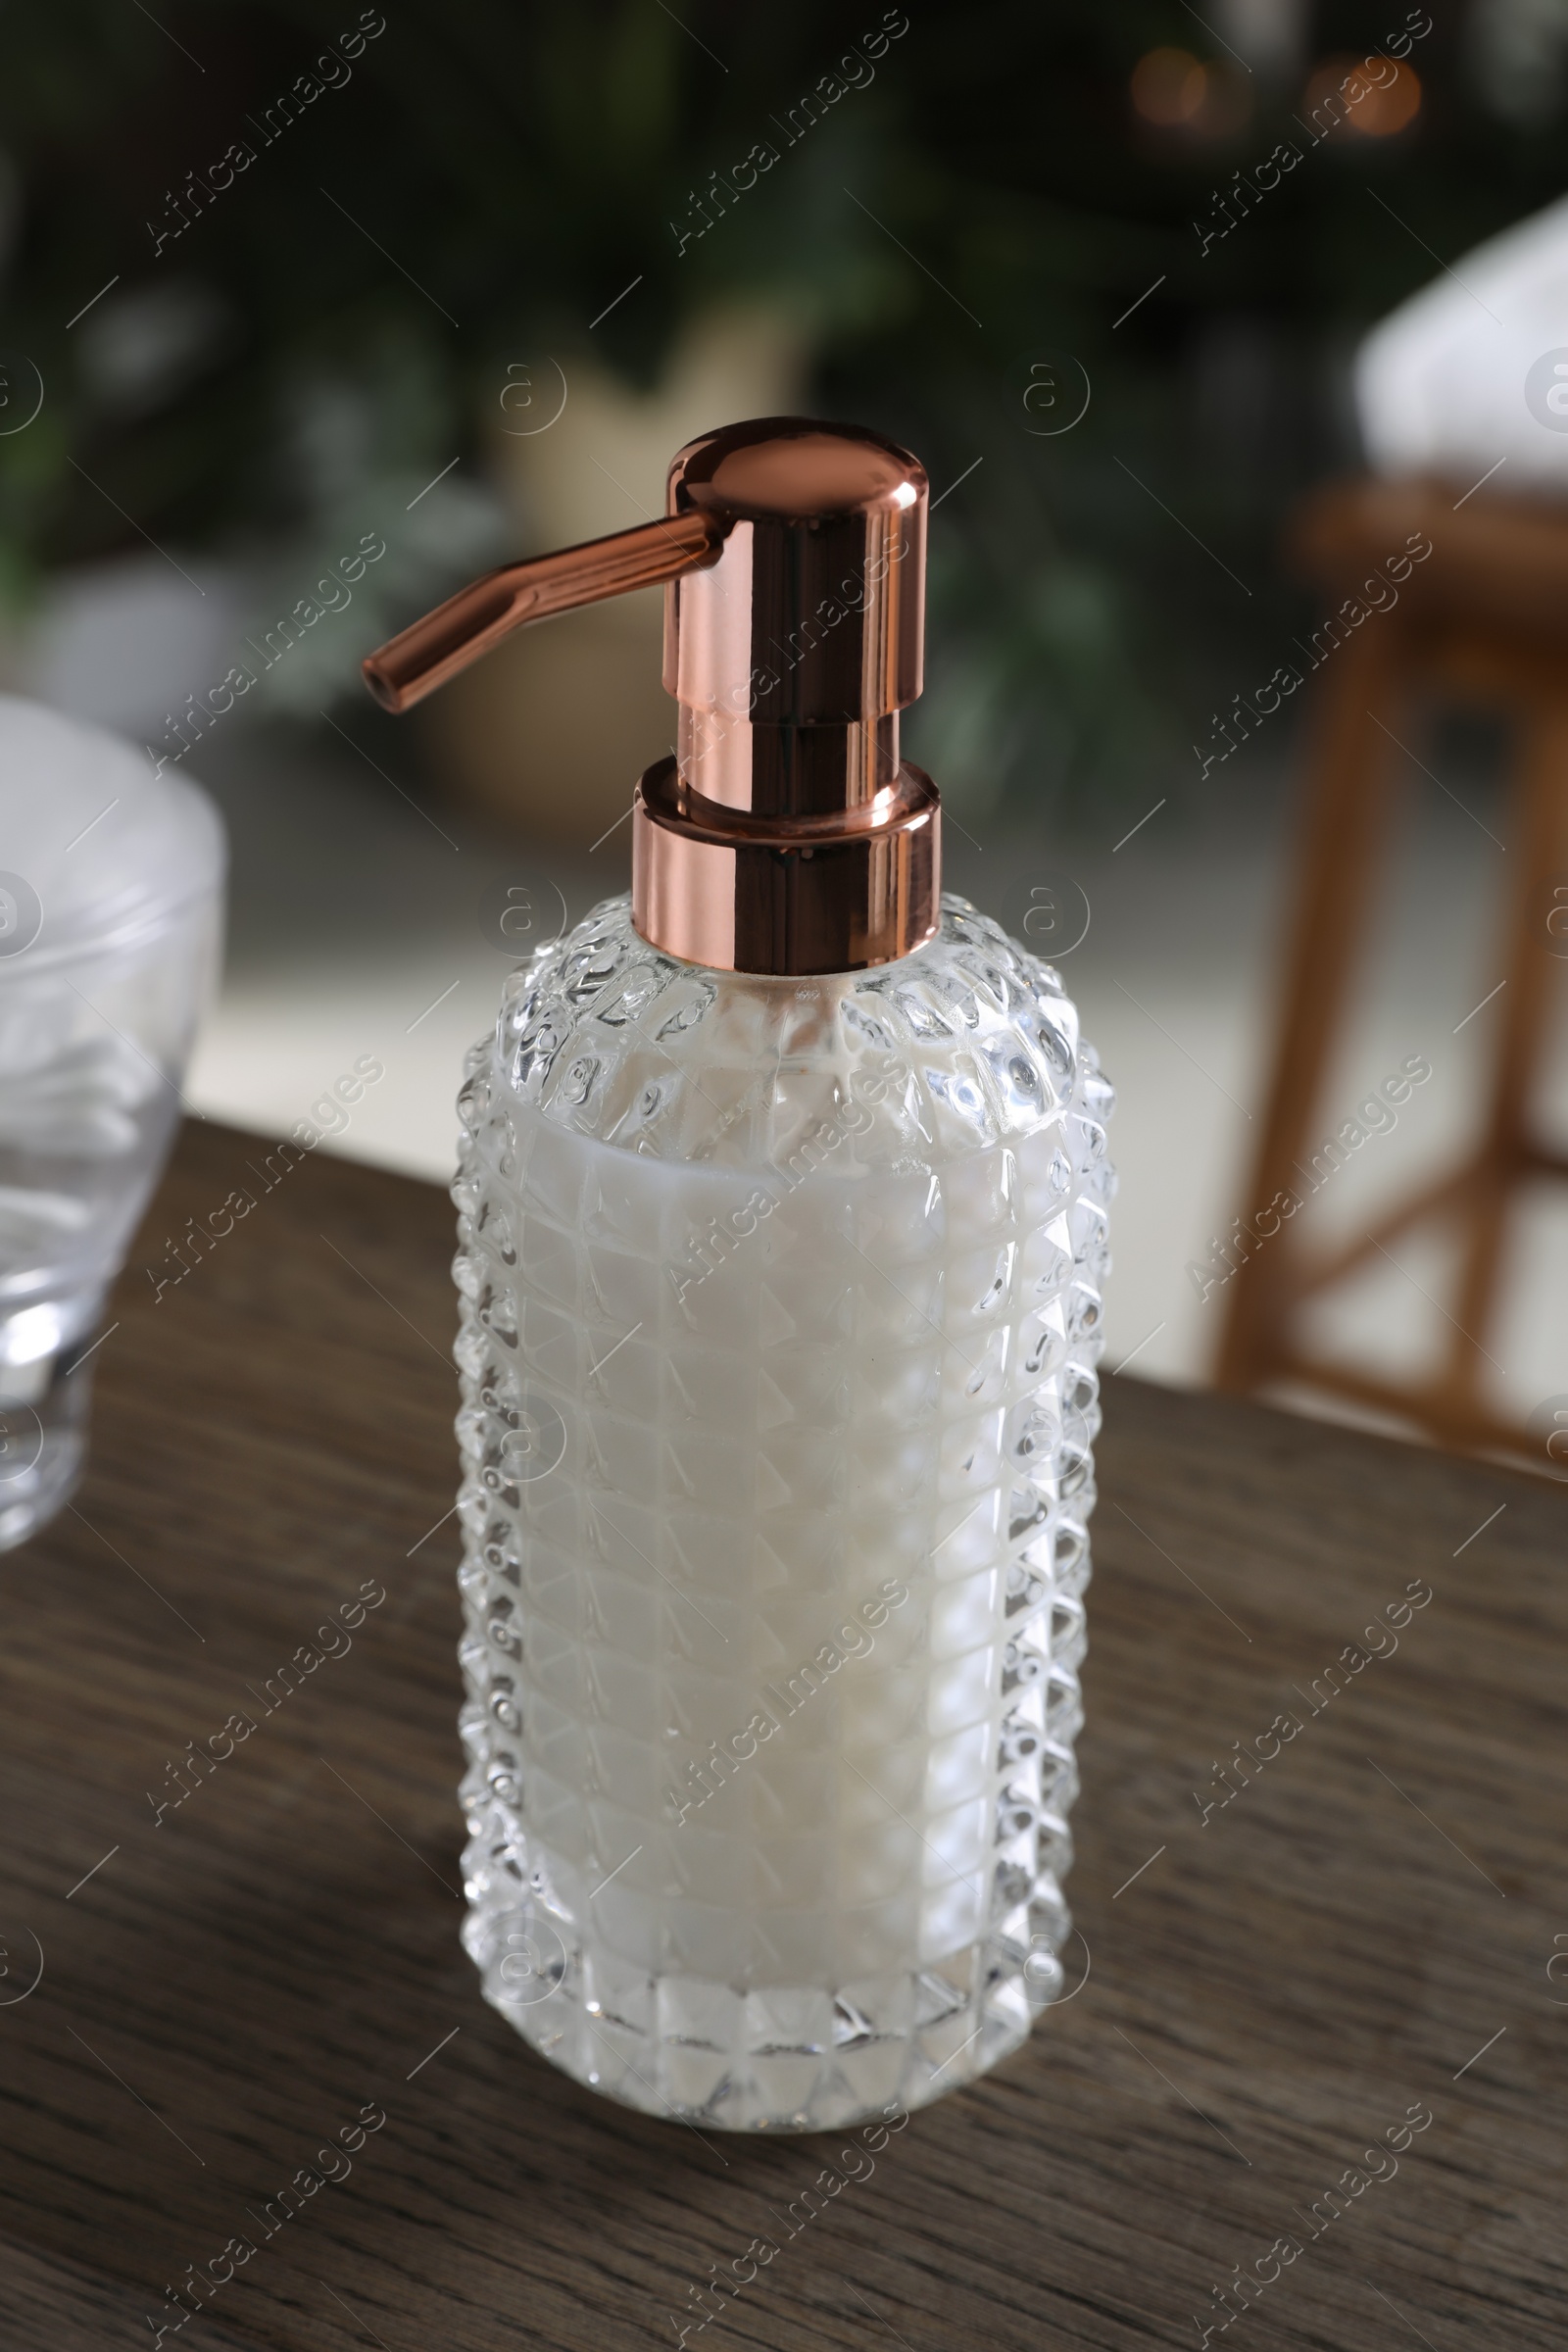 Photo of Dispenser of liquid soap on wooden table in bathroom